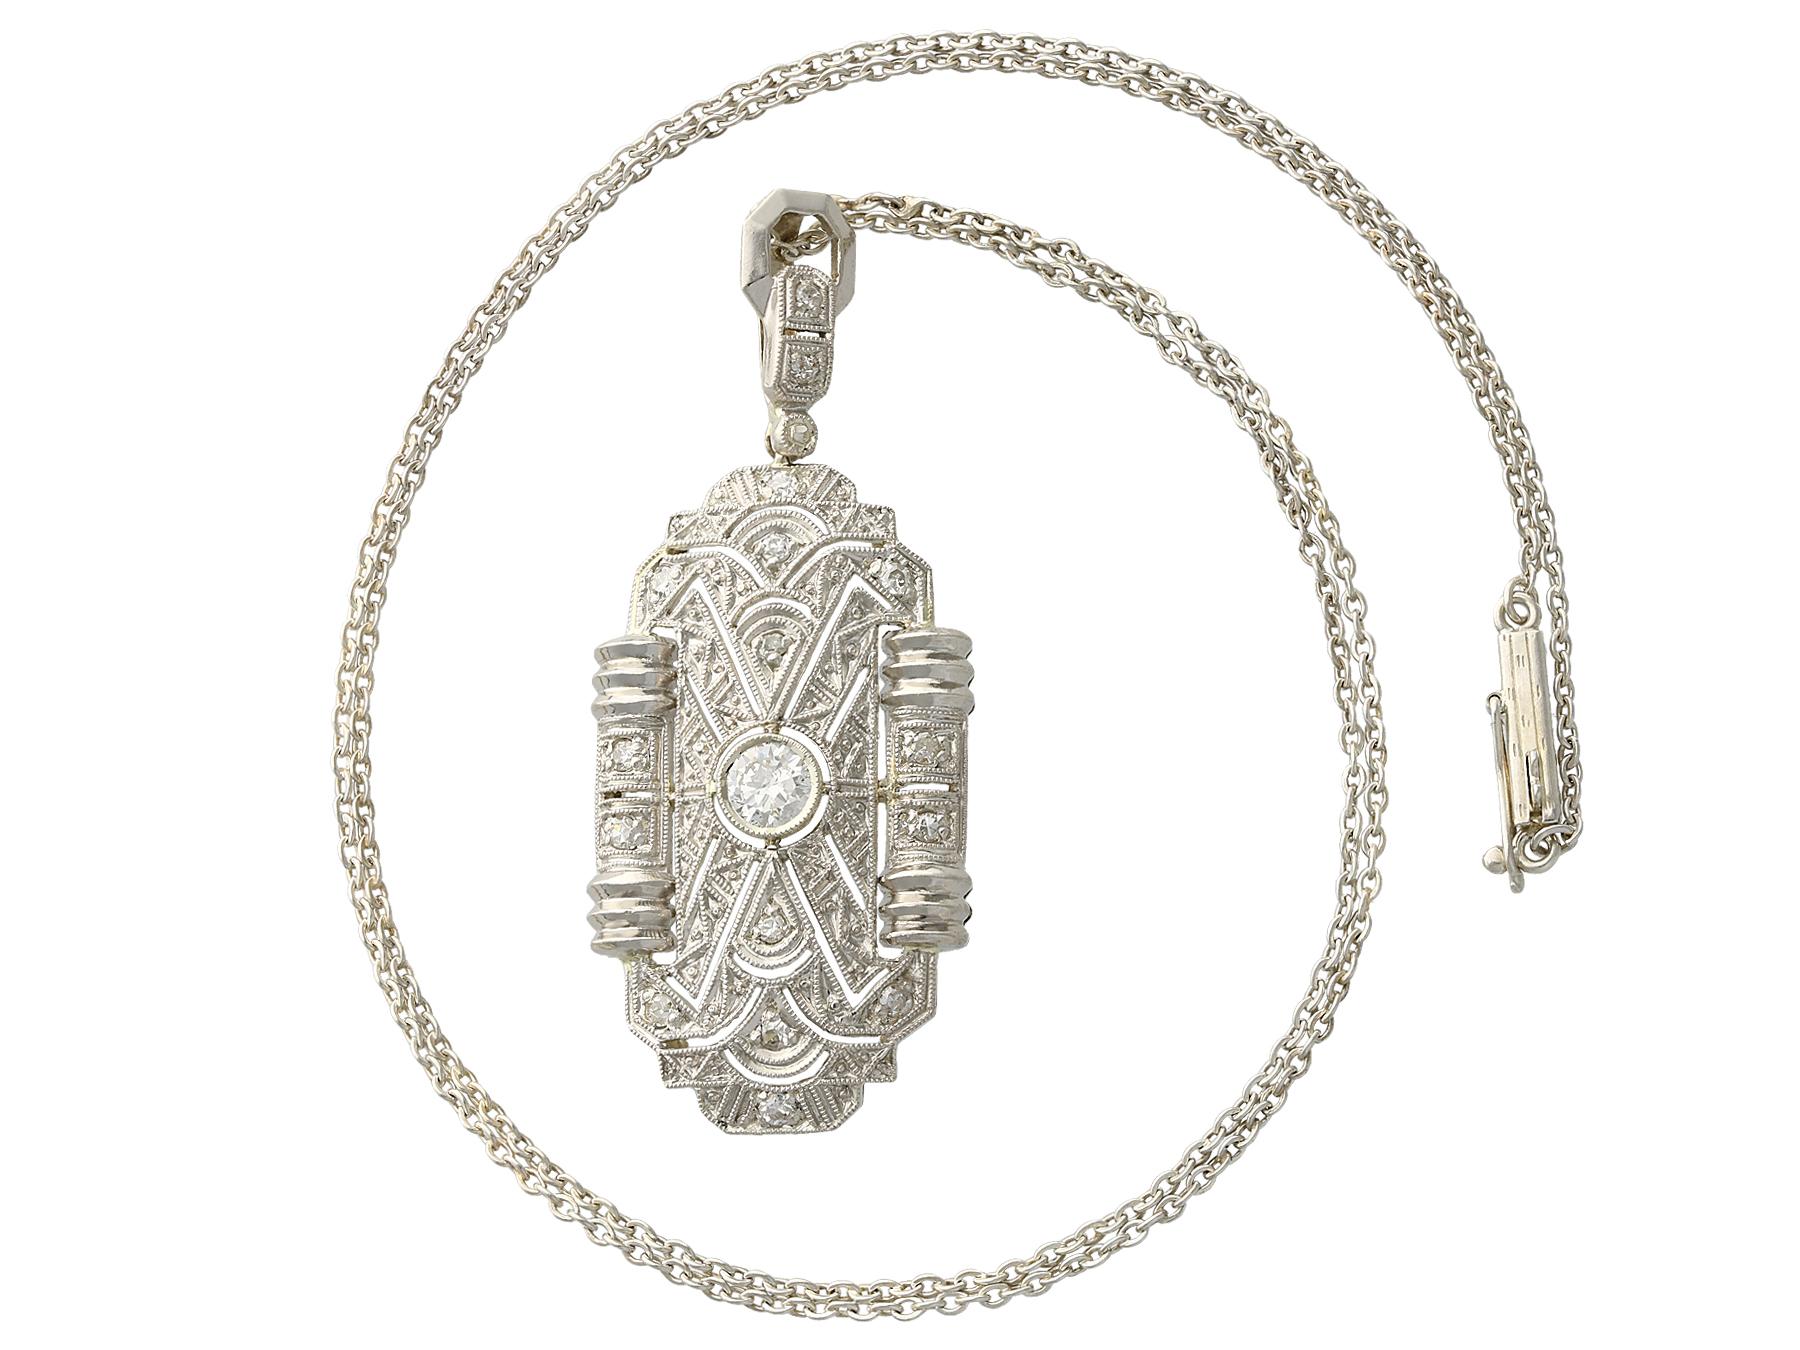 A stunning, fine and impressive antique 0.43 carat diamond and 14 karat white gold Art Deco pendant; part of our diverse antique jewelry and estate jewelry collections.

This stunning, fine and impressive antique Art Deco pendant has been crafted in